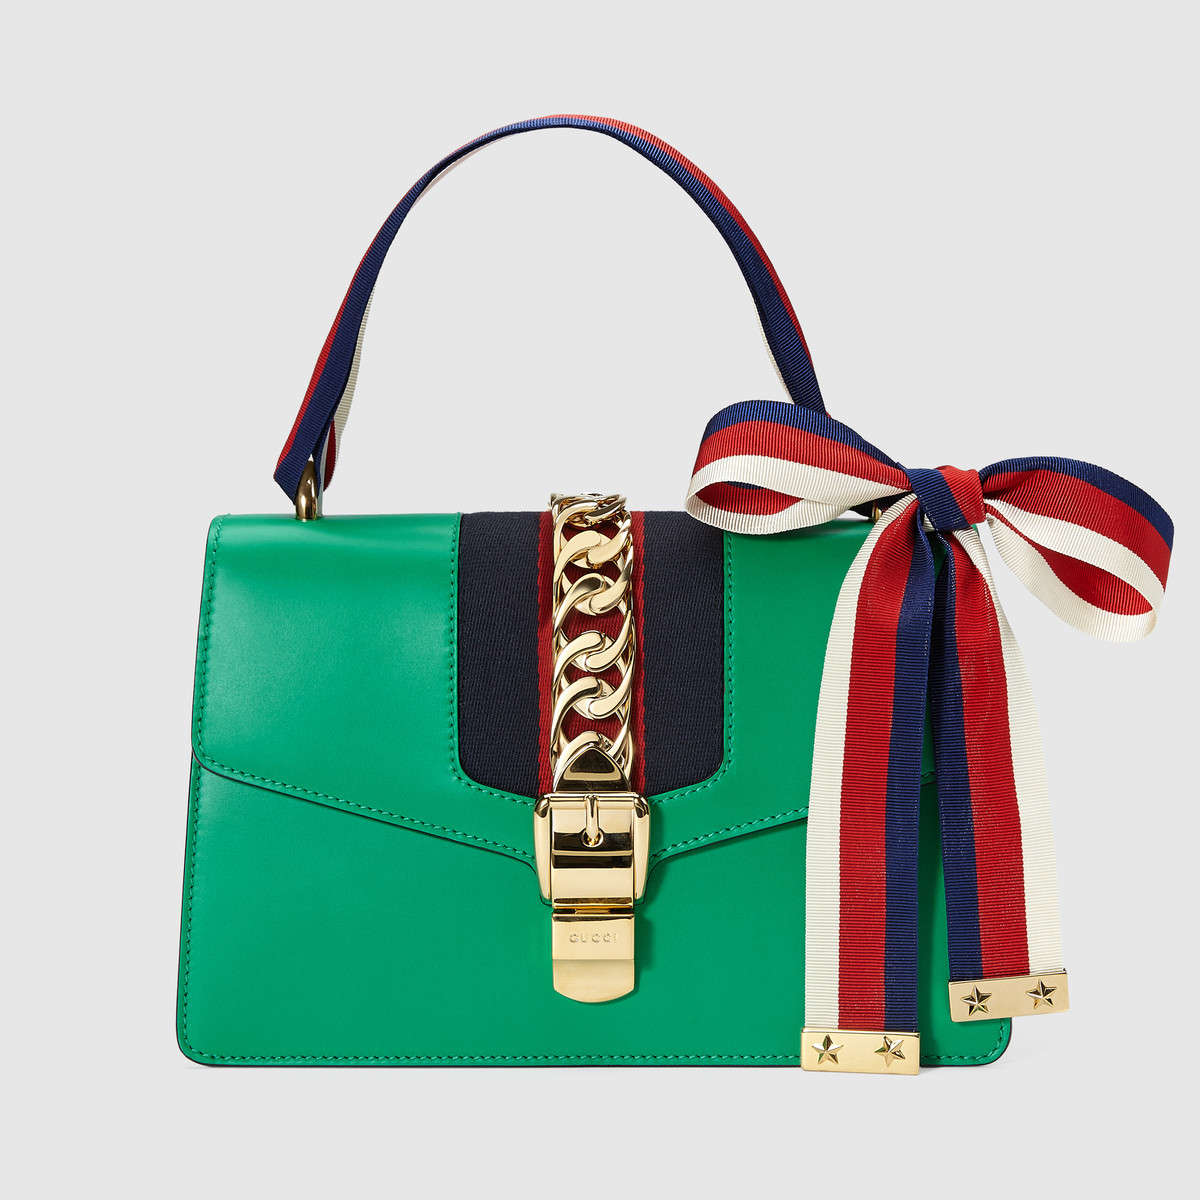 Gucci Sylvie Small Shoulder Bag in Smooth Leather - LULUX